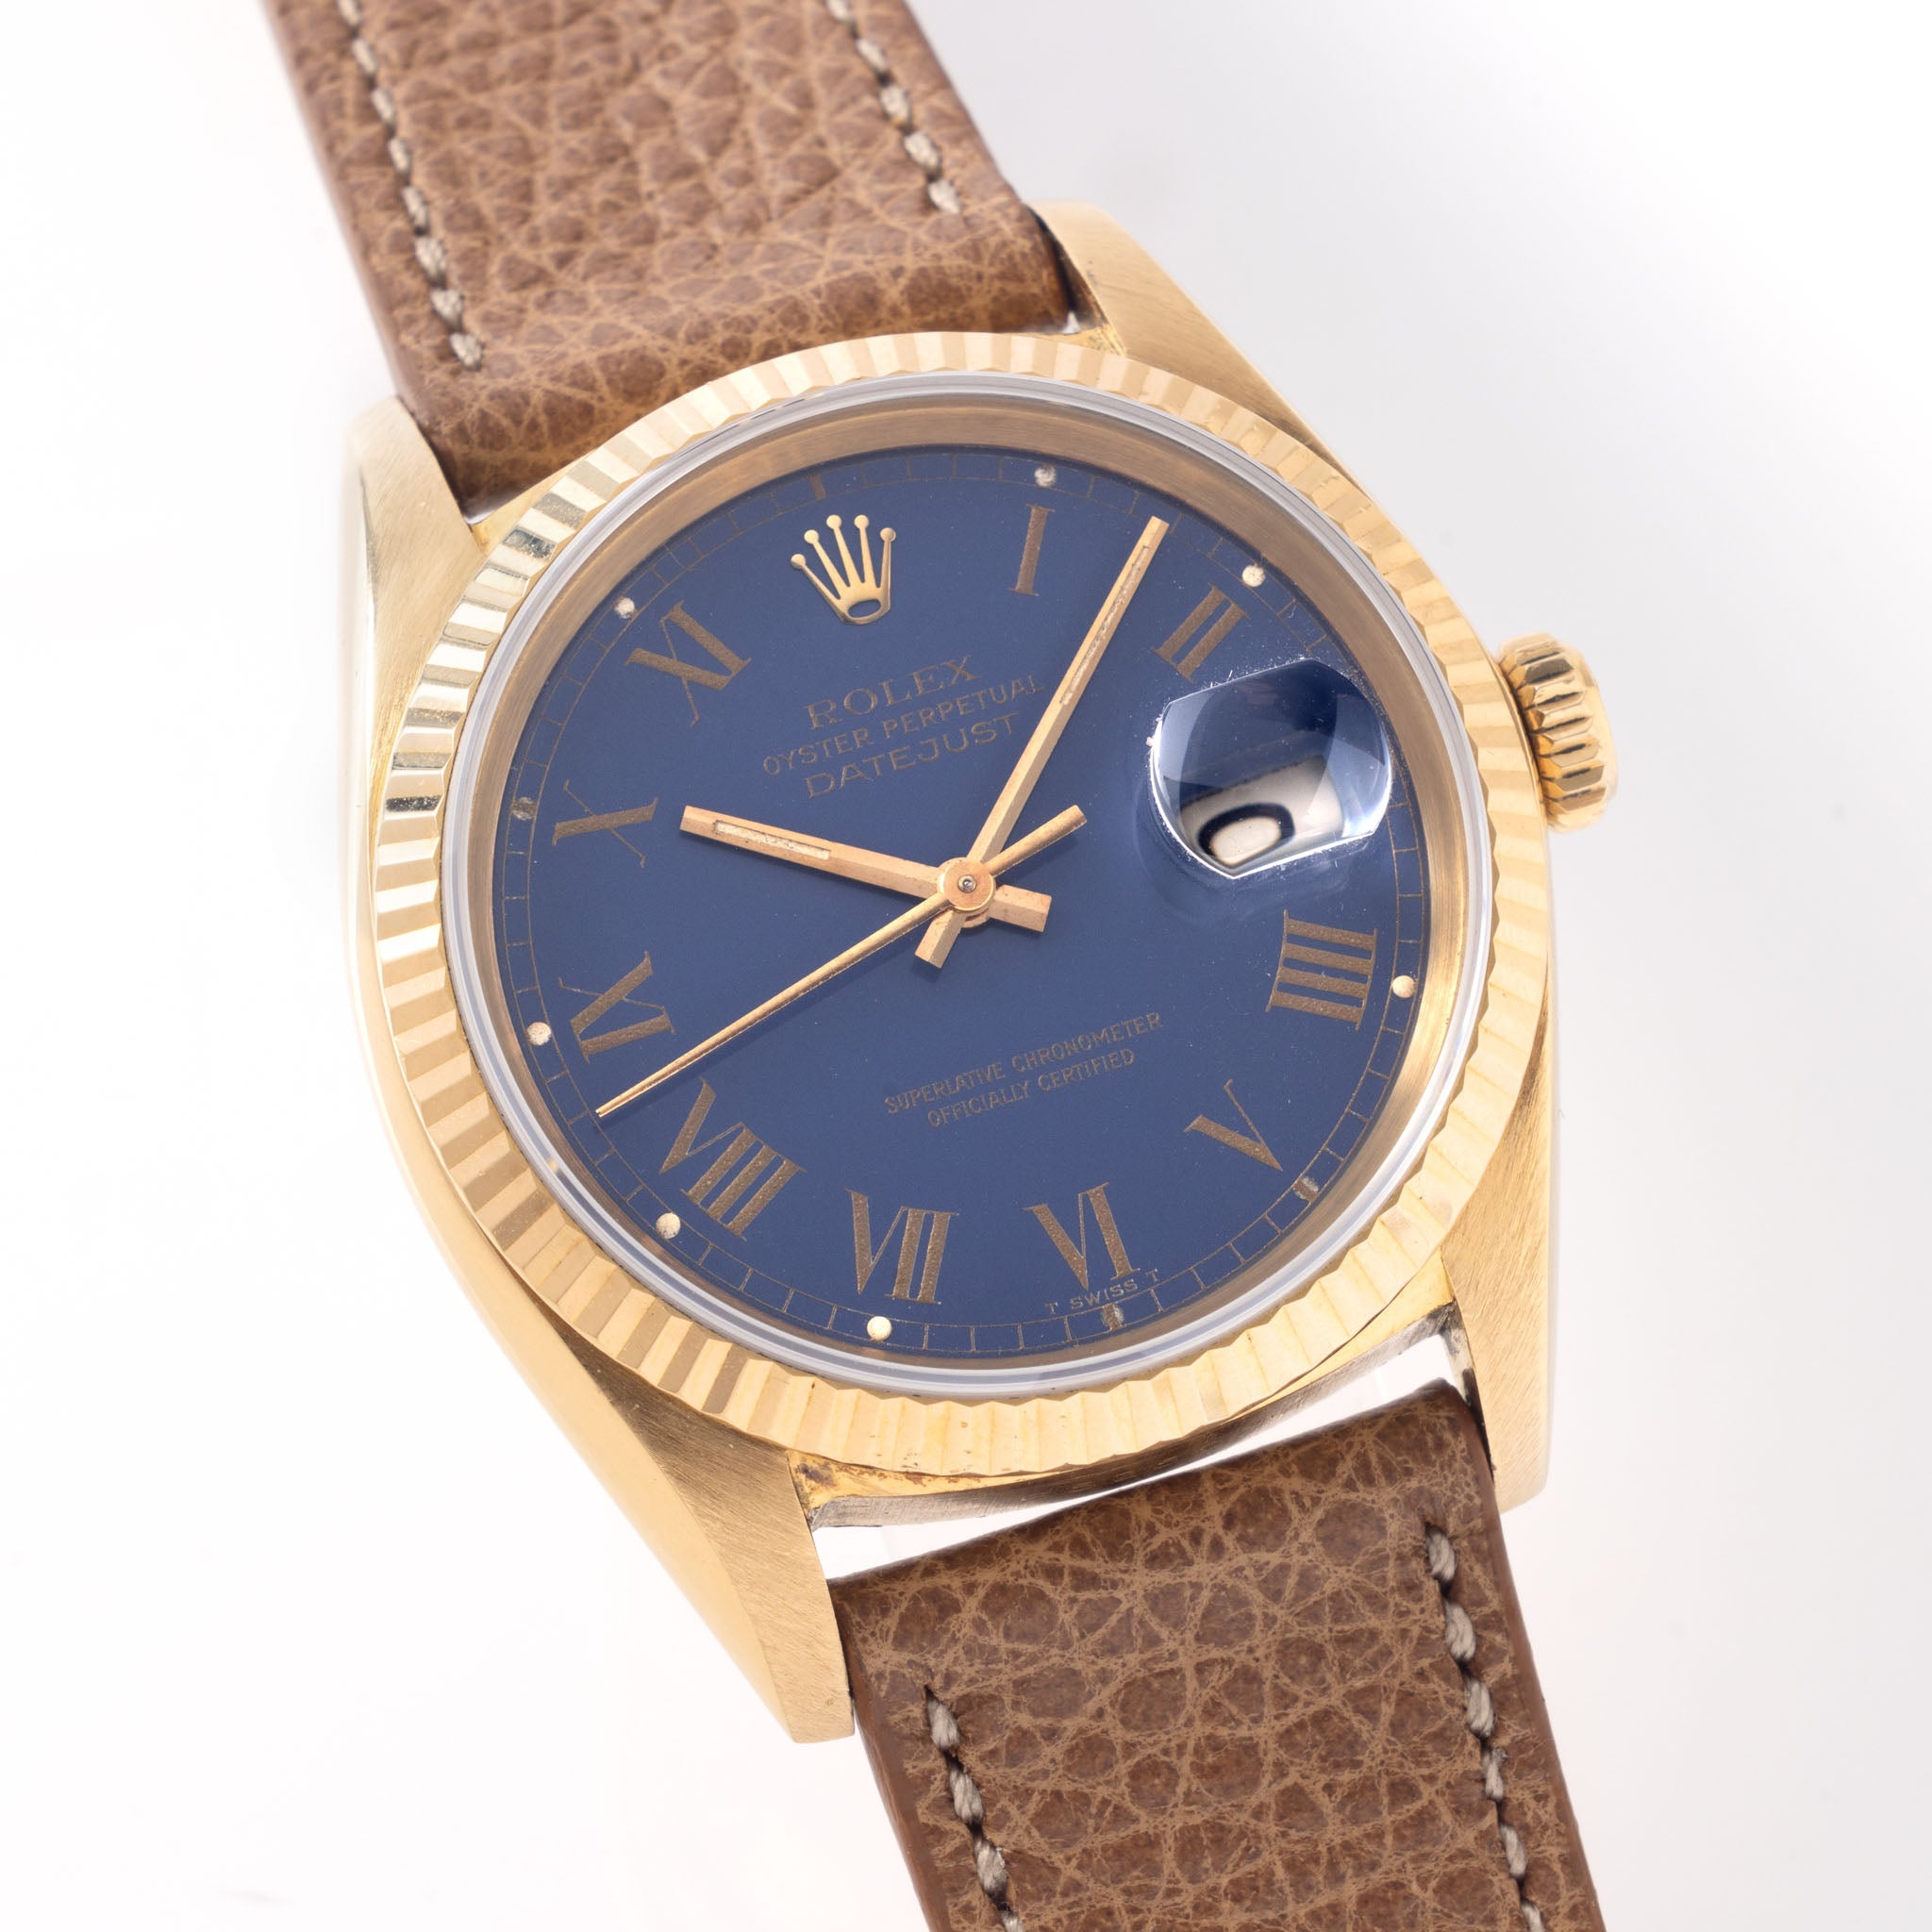 Rolex Datejust 16018 with Blue Buckley dial and original papers